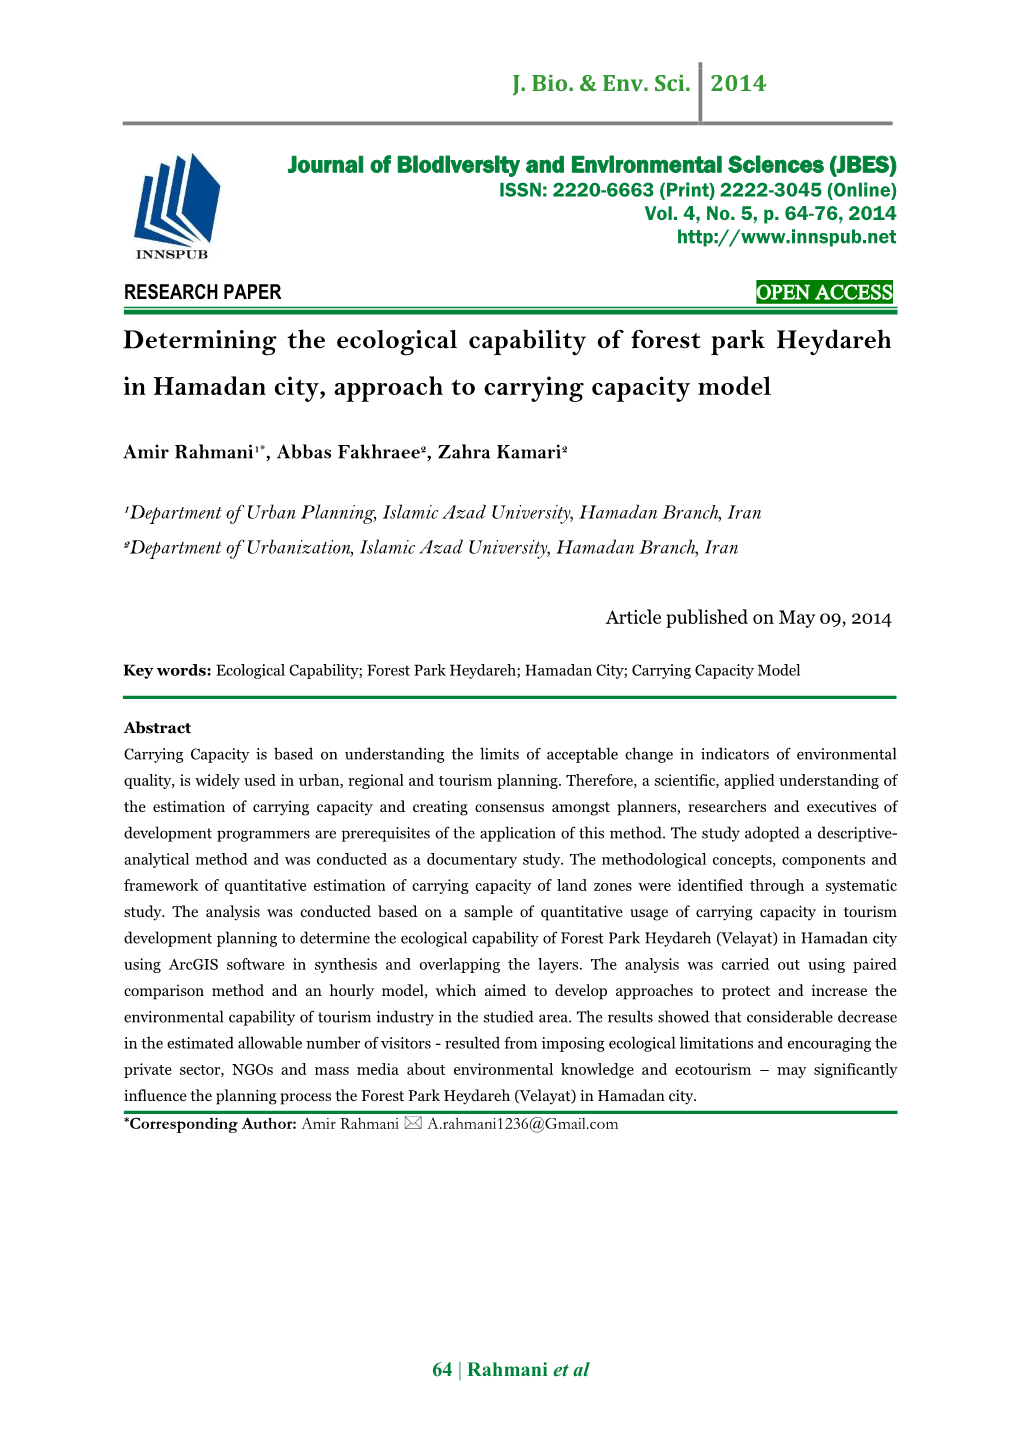 Determining the Ecological Capability of Forest Park Heydareh in Hamadan City, Approach to Carrying Capacity Model